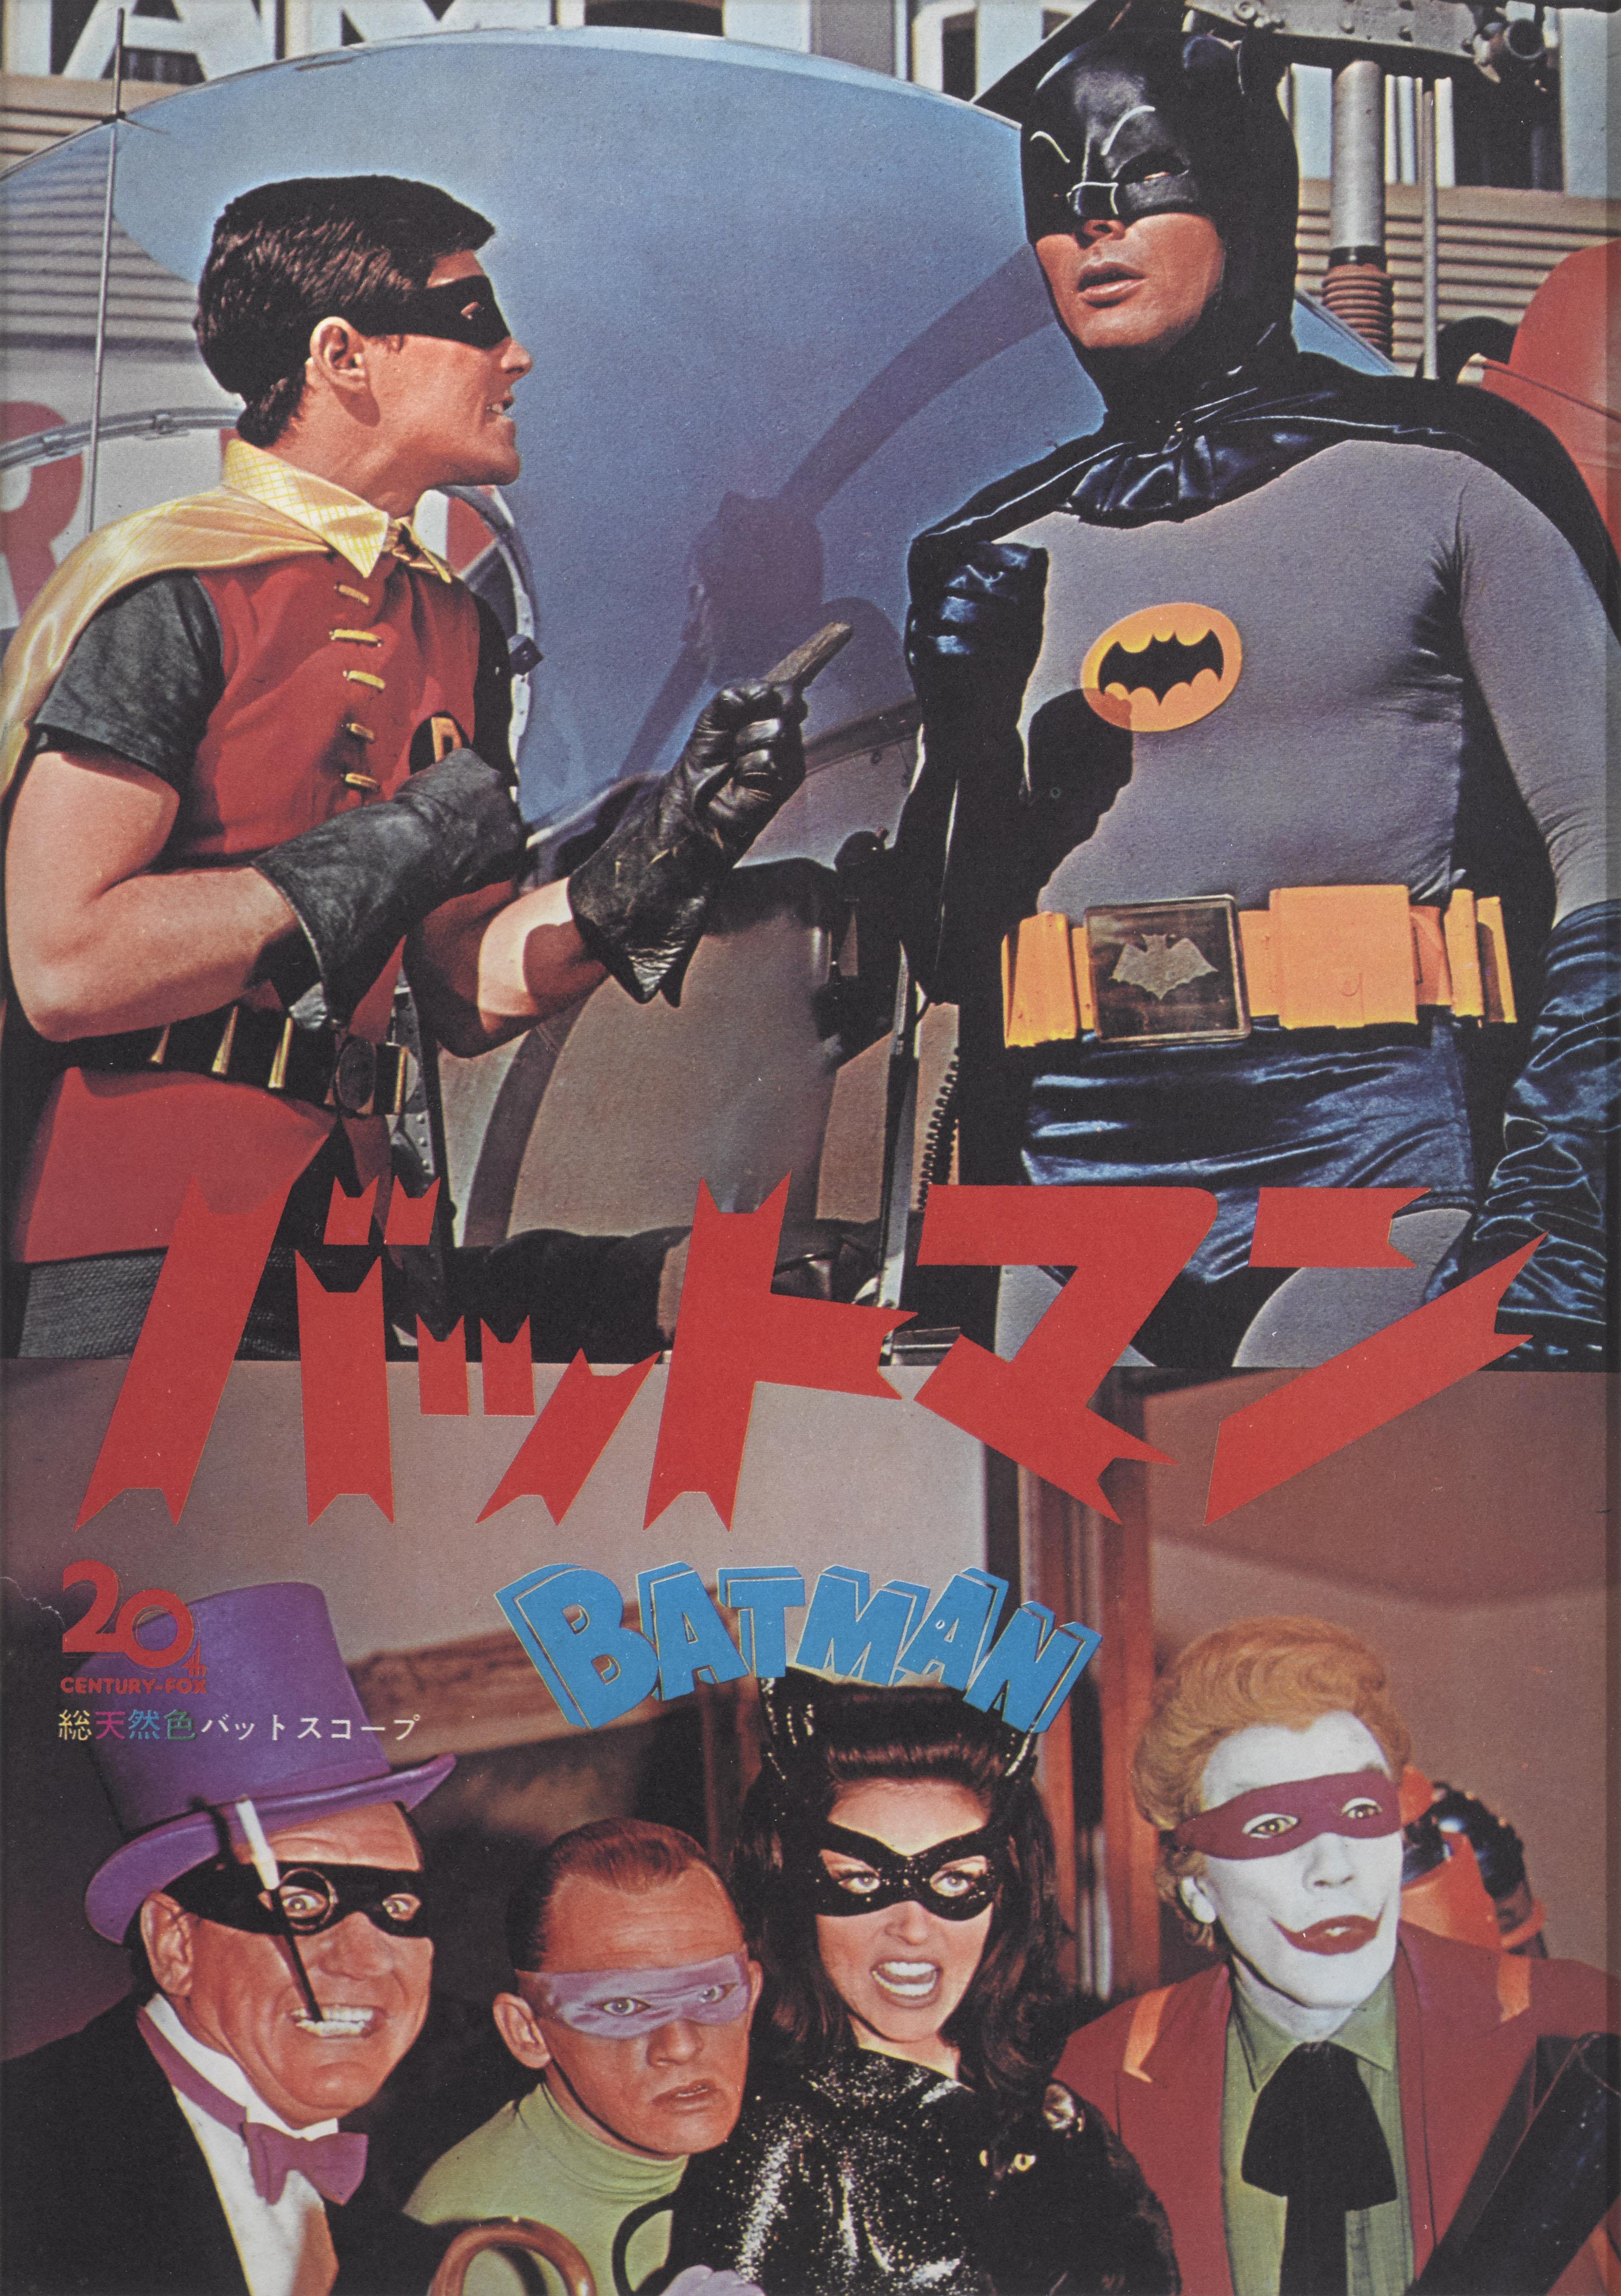 Original Japanese program cover for Leslie Martinson's 1966 Batman staring Adam West as Batman and Burt Ward as Robin. This piece is conservation paper backed and conservation framed in Sapele wood frame with acid free card mounts and UV plexiglass.